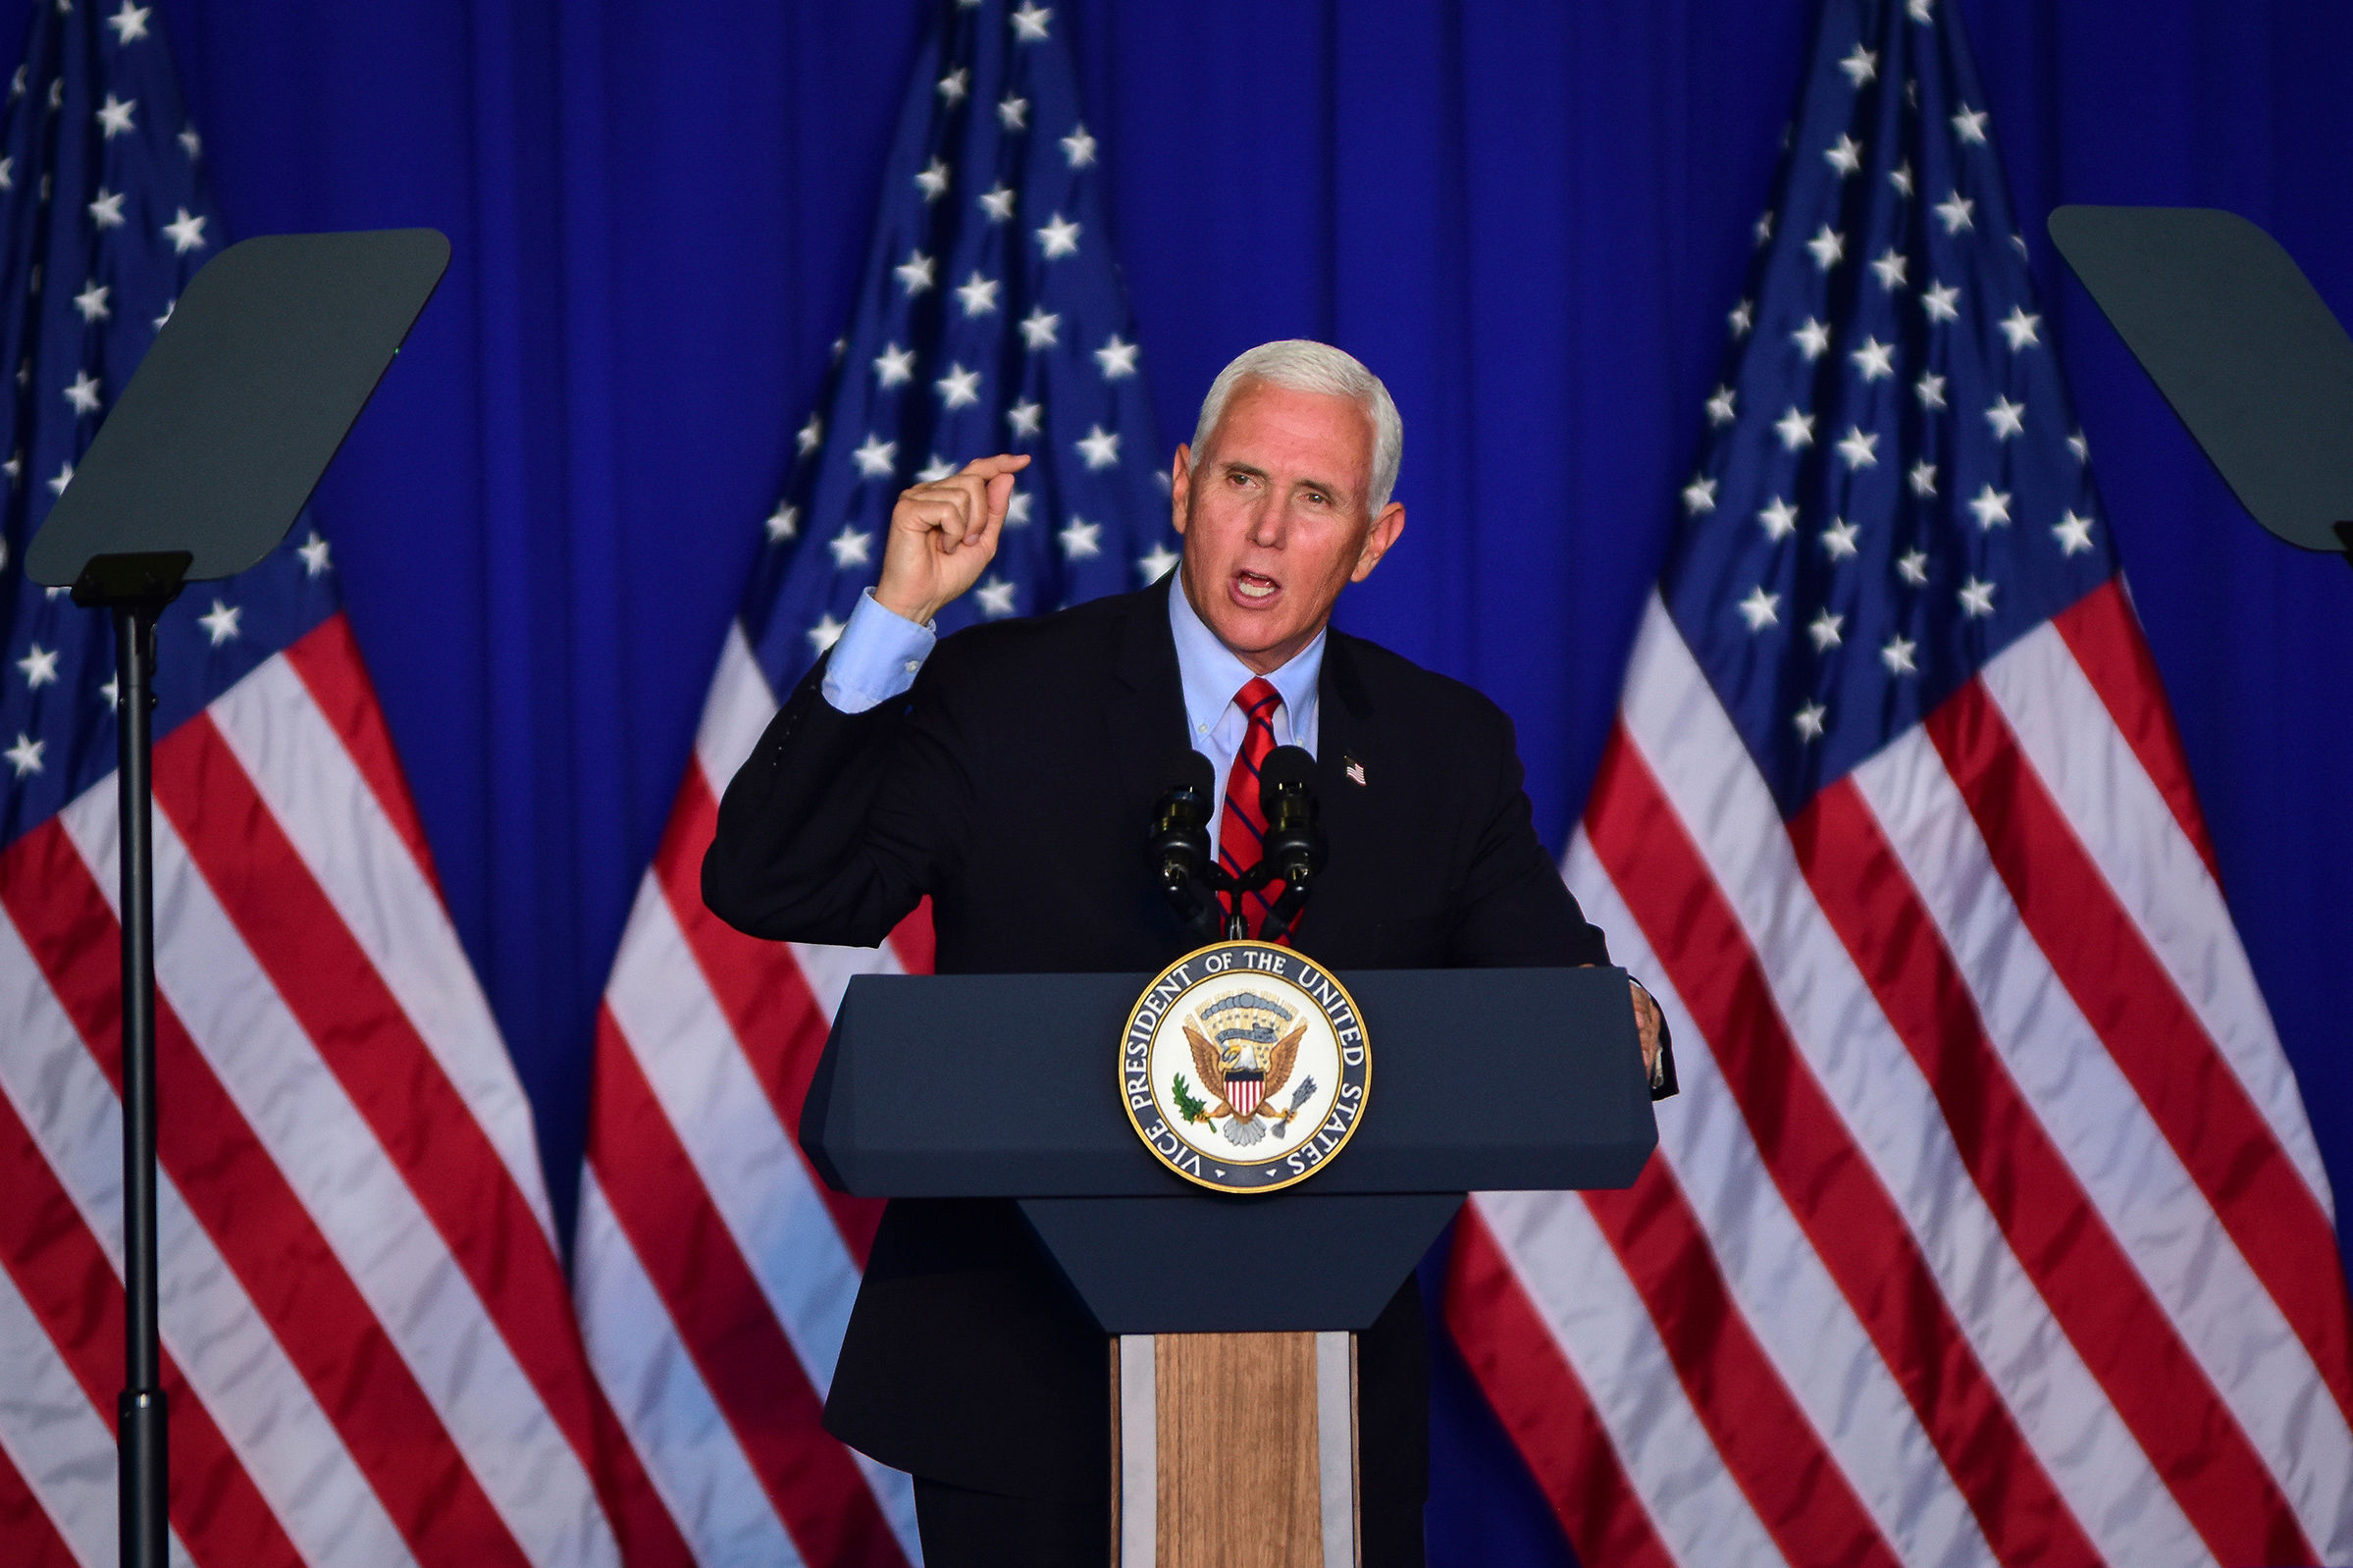 Mike Pence: America’s Vice President and  Donald Trump’s right-hand man